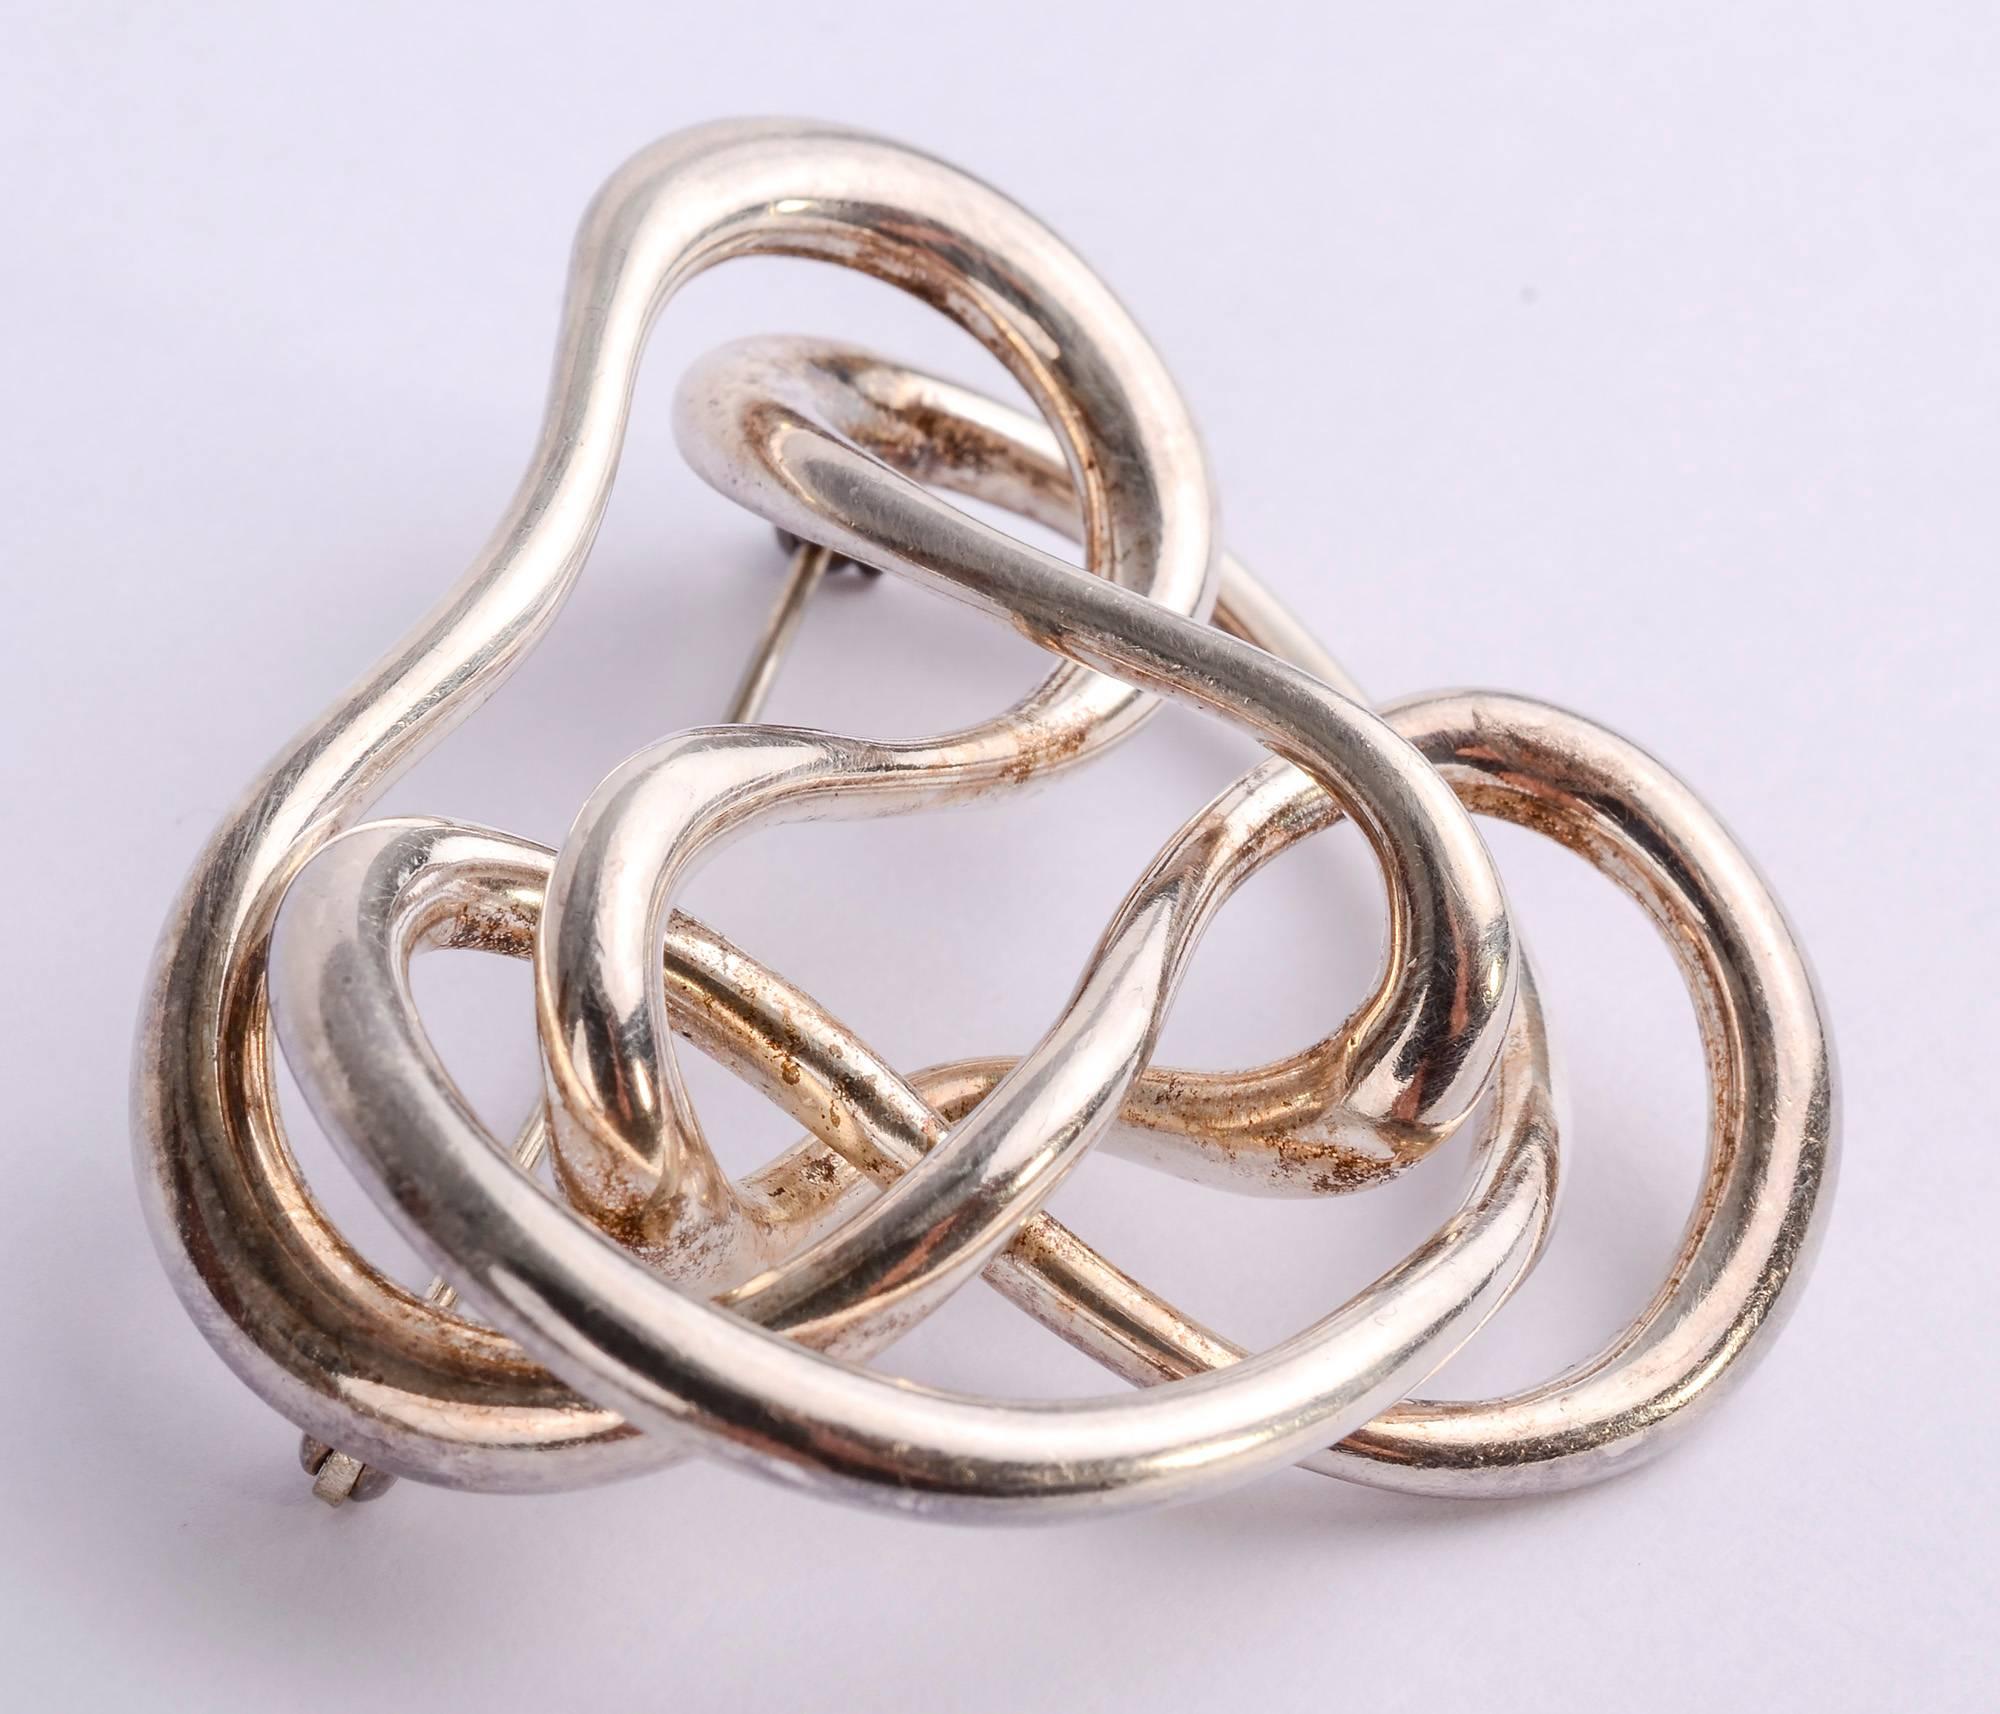 Freeform scribble brooch of sterling silver made by famed American designer, Angela Cummings. The brooch is dated 1987. It measures 2 inches wide and 1 3/4 inches tall. The silver squiggles are intertwined with space between them giving